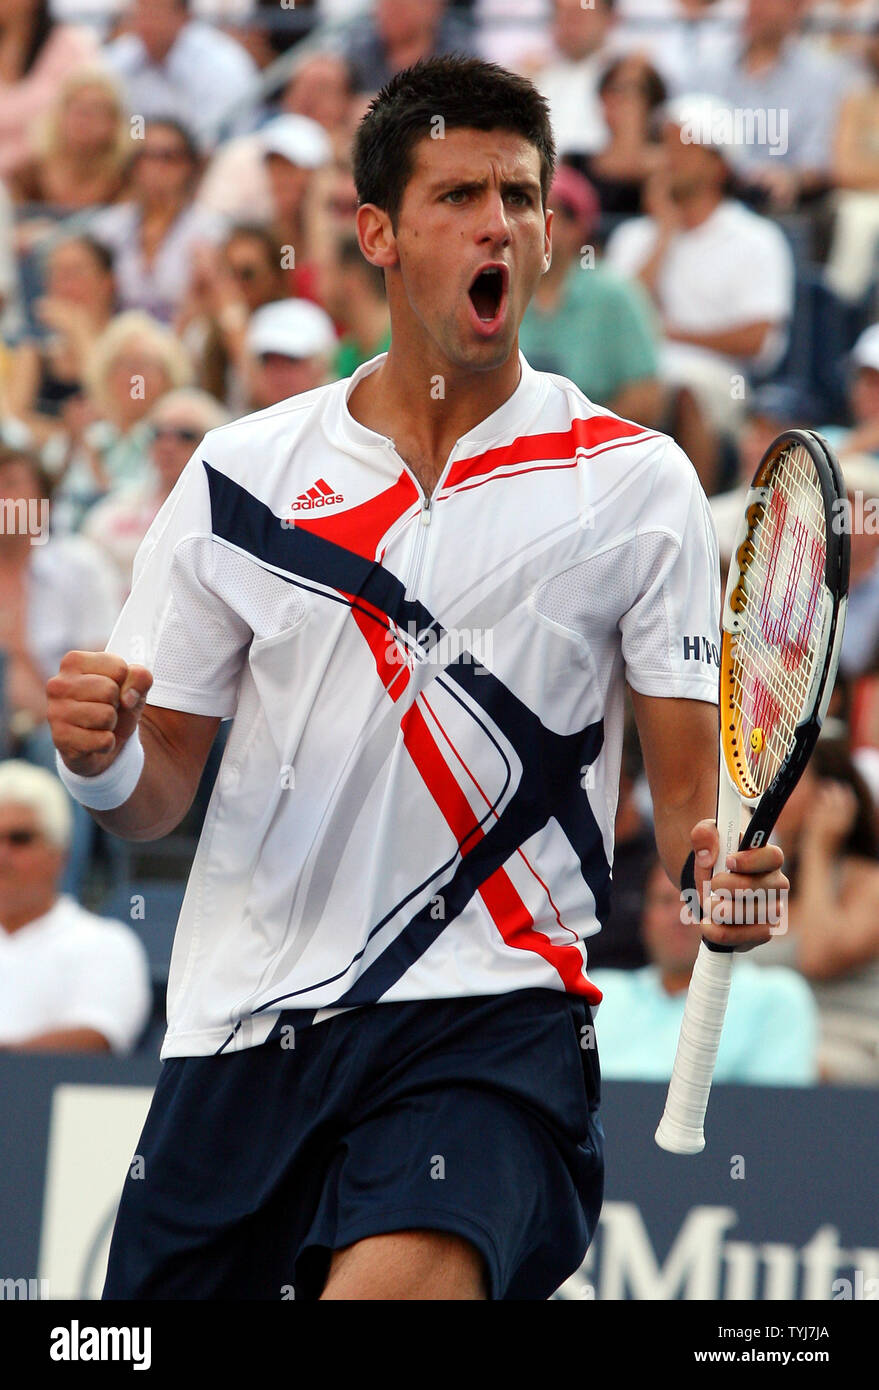 Novak Djokovic pumps his fist after winning a point while playing in the  U.S. Open finals against Roger Federer on day14 at the U.S. Open in New  York City on September 9,